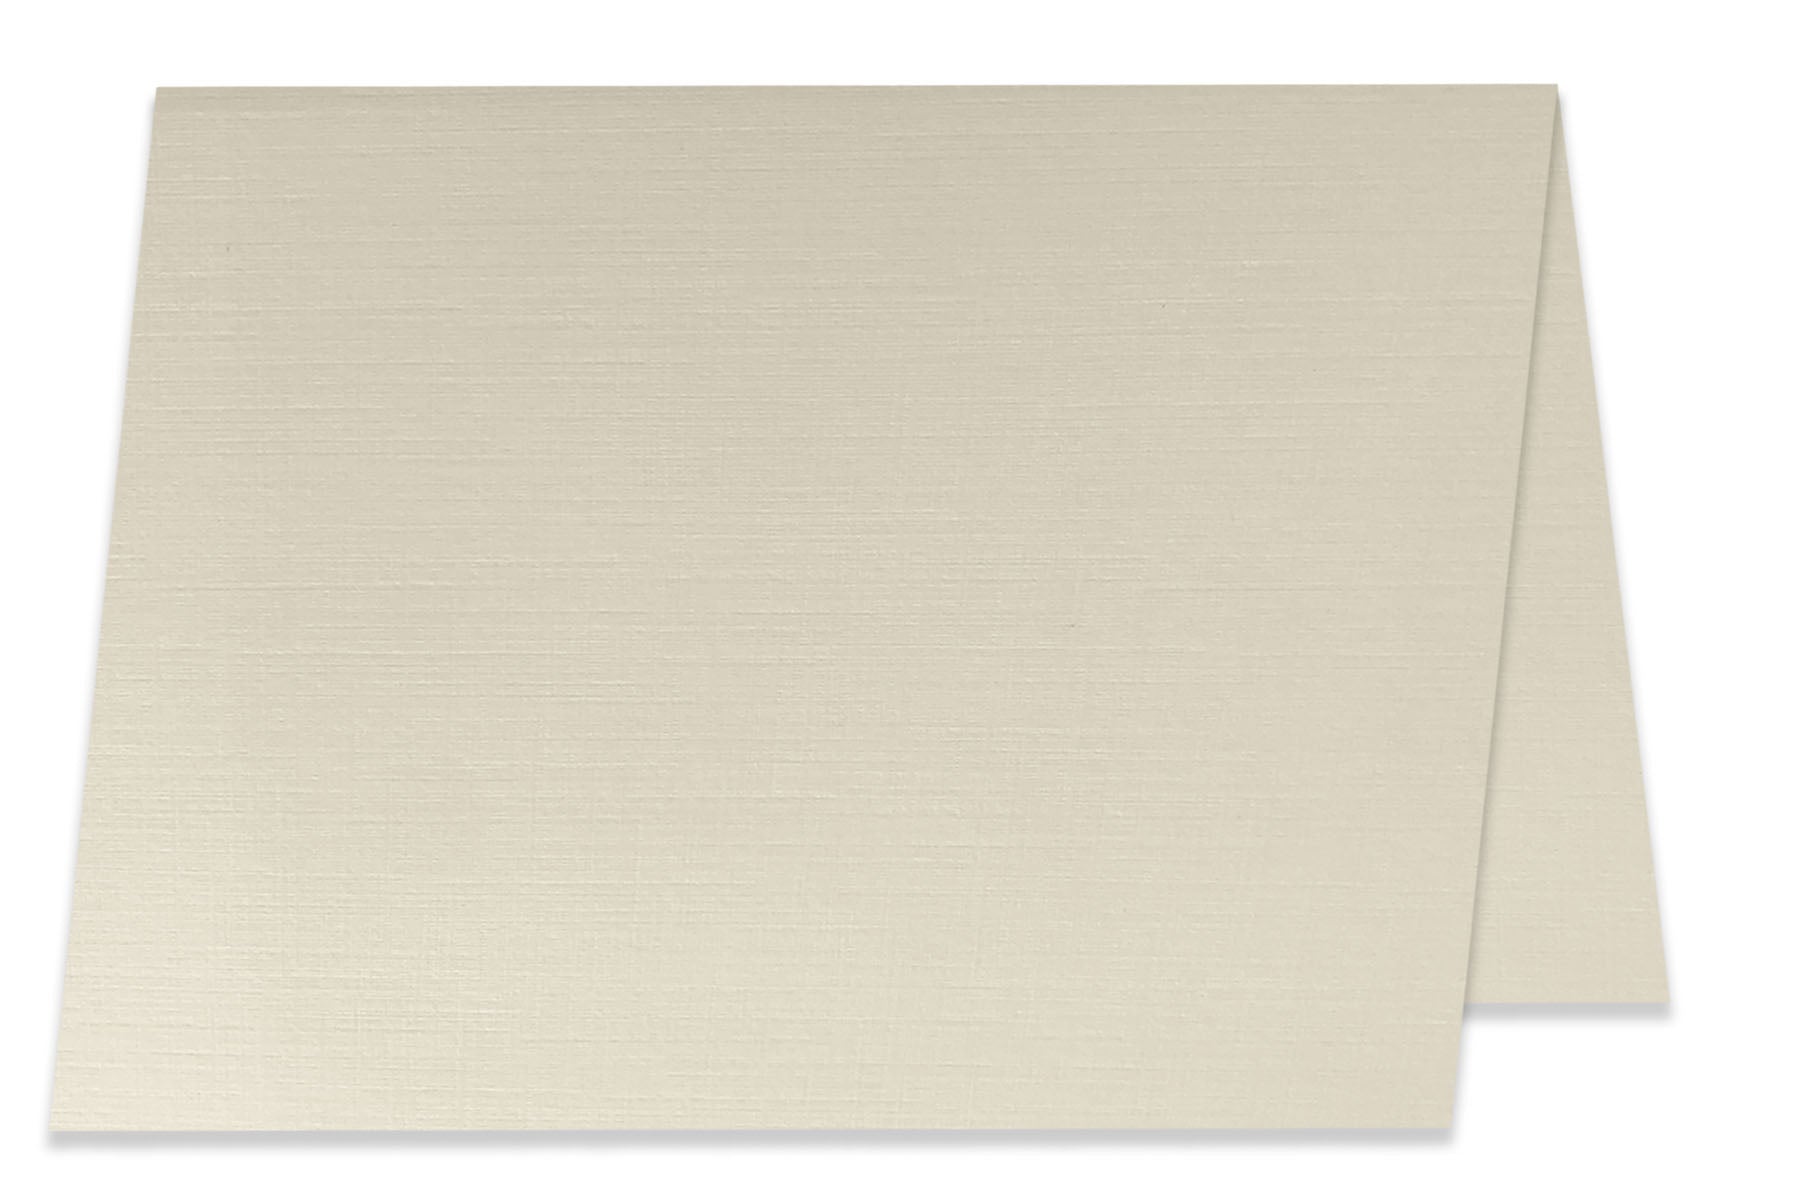 Hamilco White Linen Cards and Envelopes - Flat 5 x 7 Cardstock